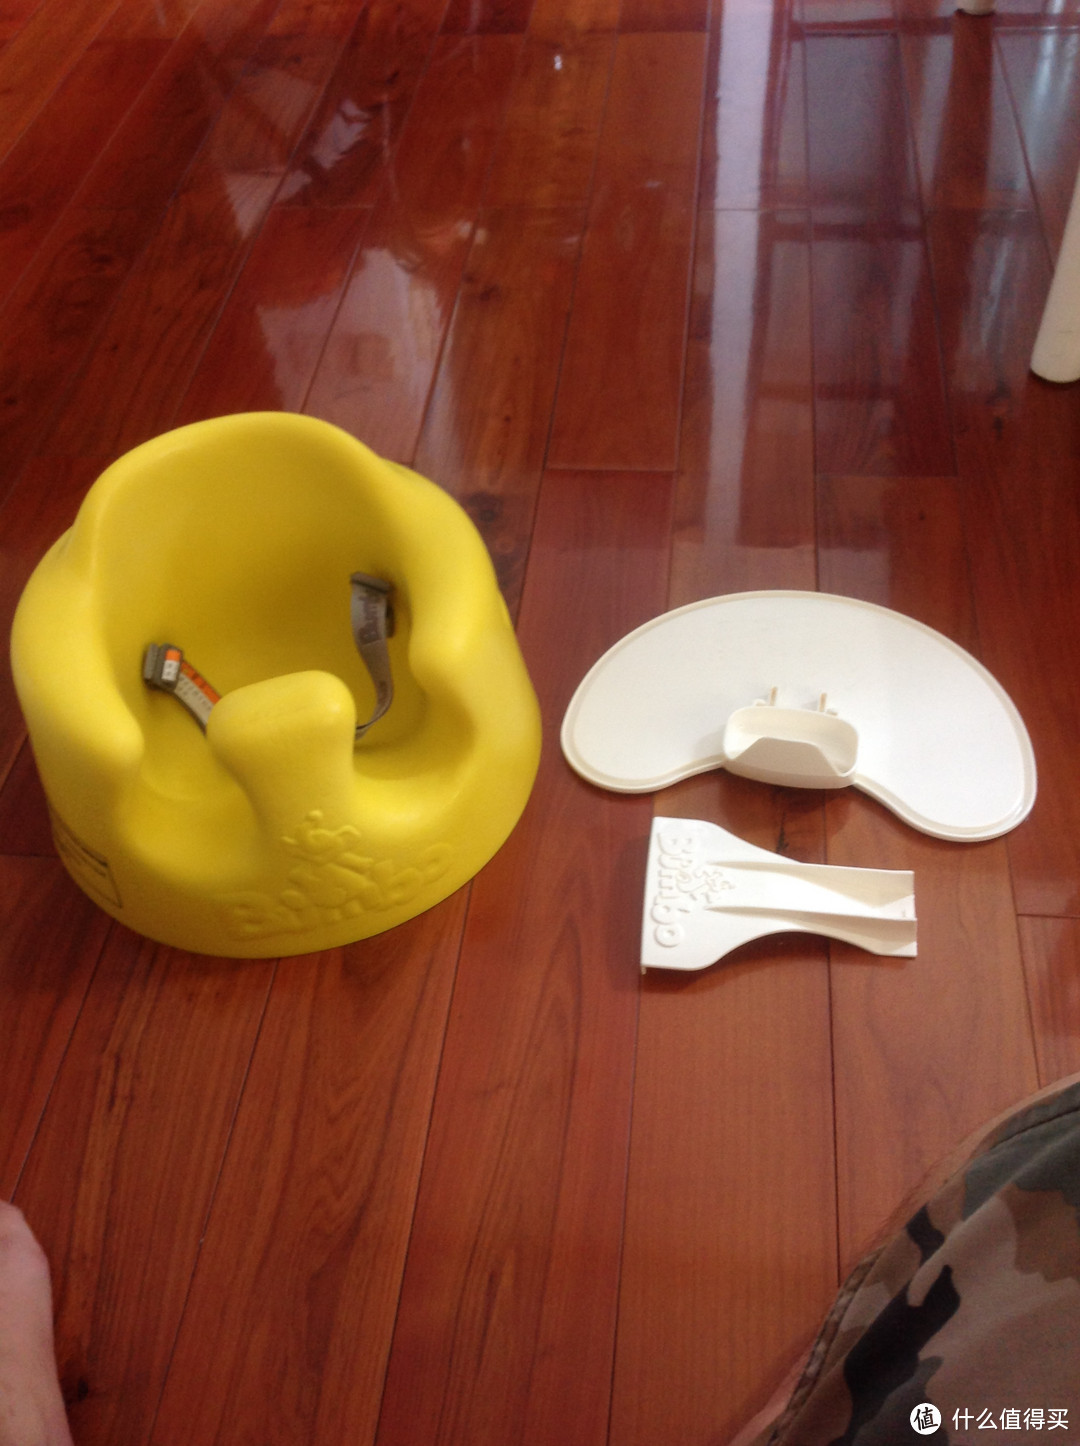 Bumbo Floor Seat and Play Tray Set 婴儿餐椅